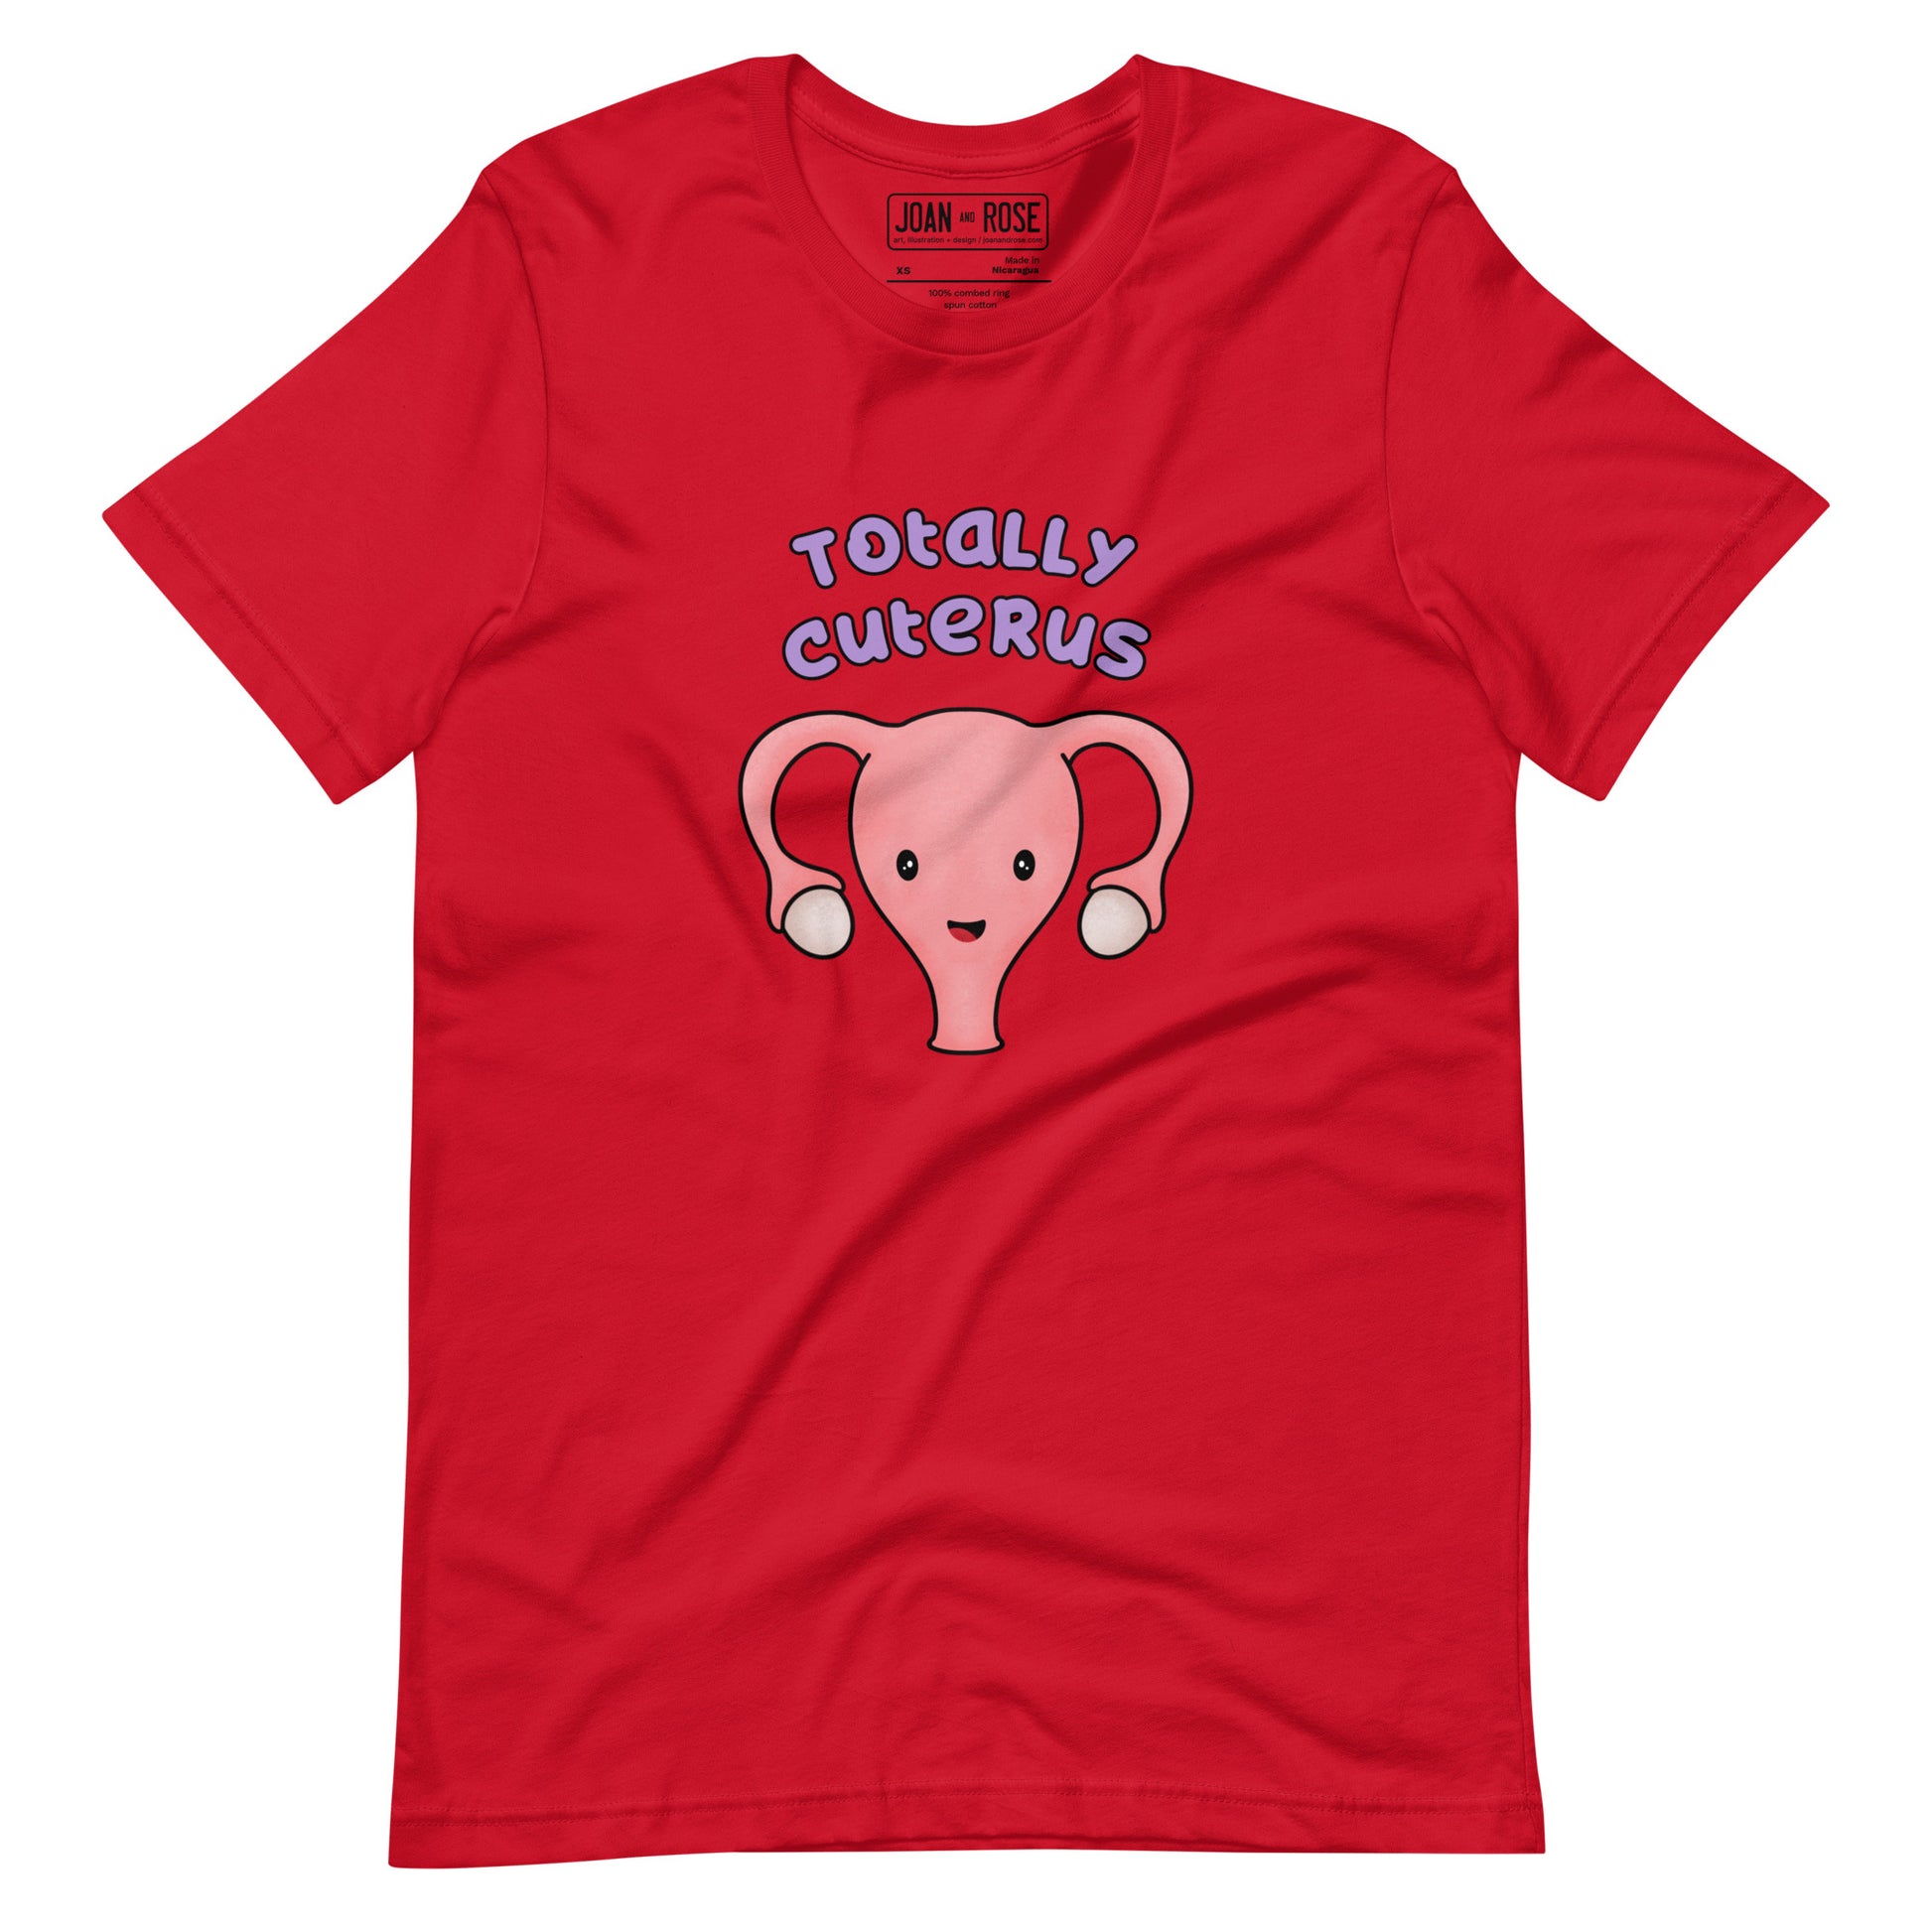 Red coloured  t-shirt with an illustration of a cute uterus character smiling with the text in purple 'Totally Cuterus'